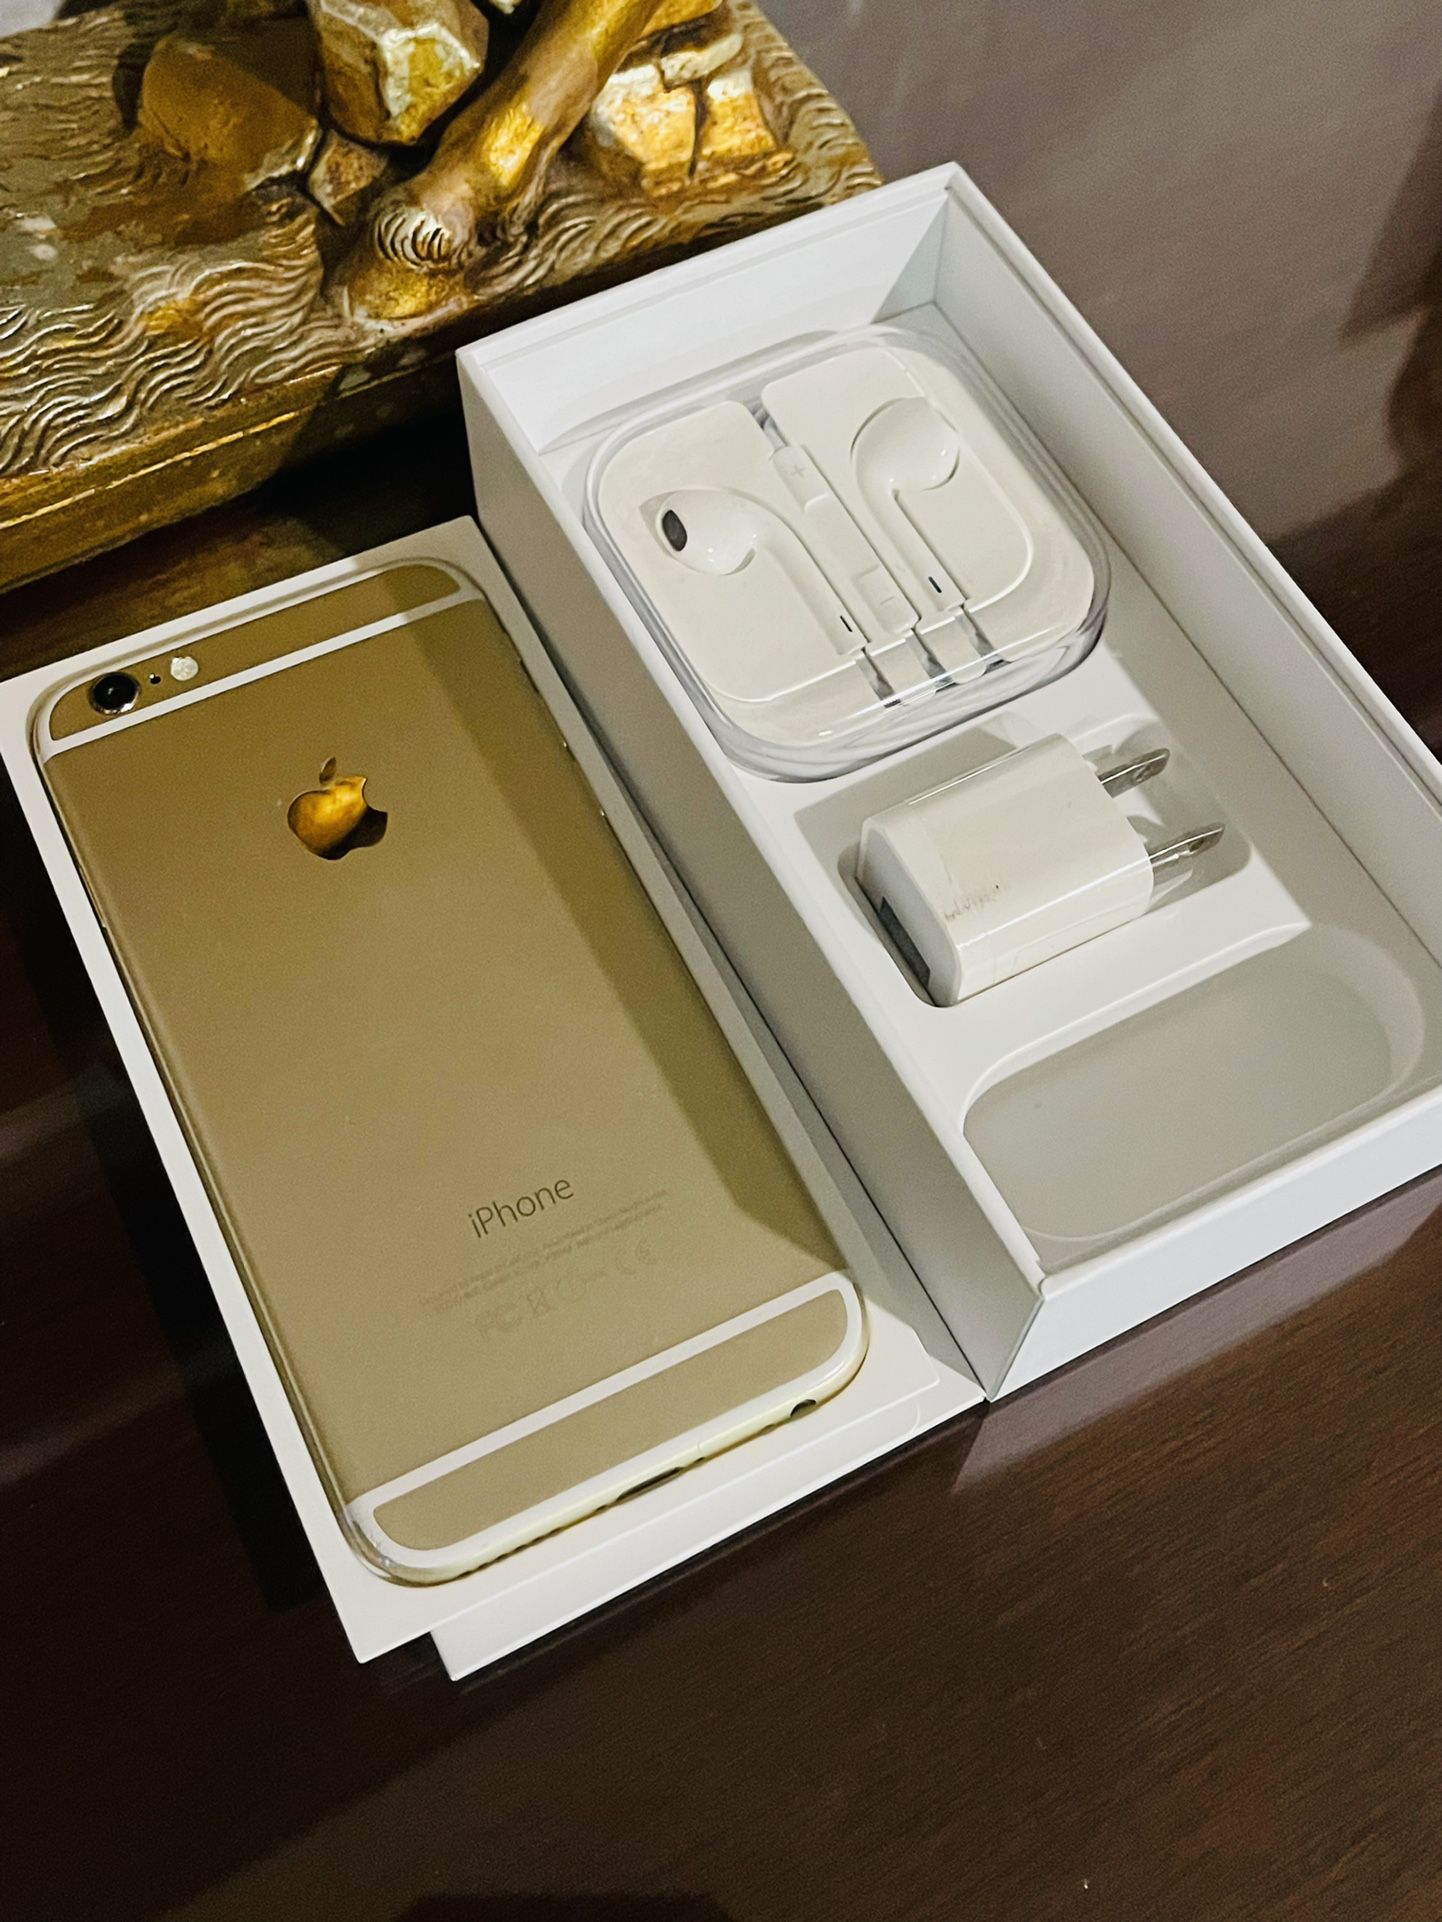 Phone 6.32gb gold style APPLE EARPODS EARPHONES & Adapter charge included…original box iPhone